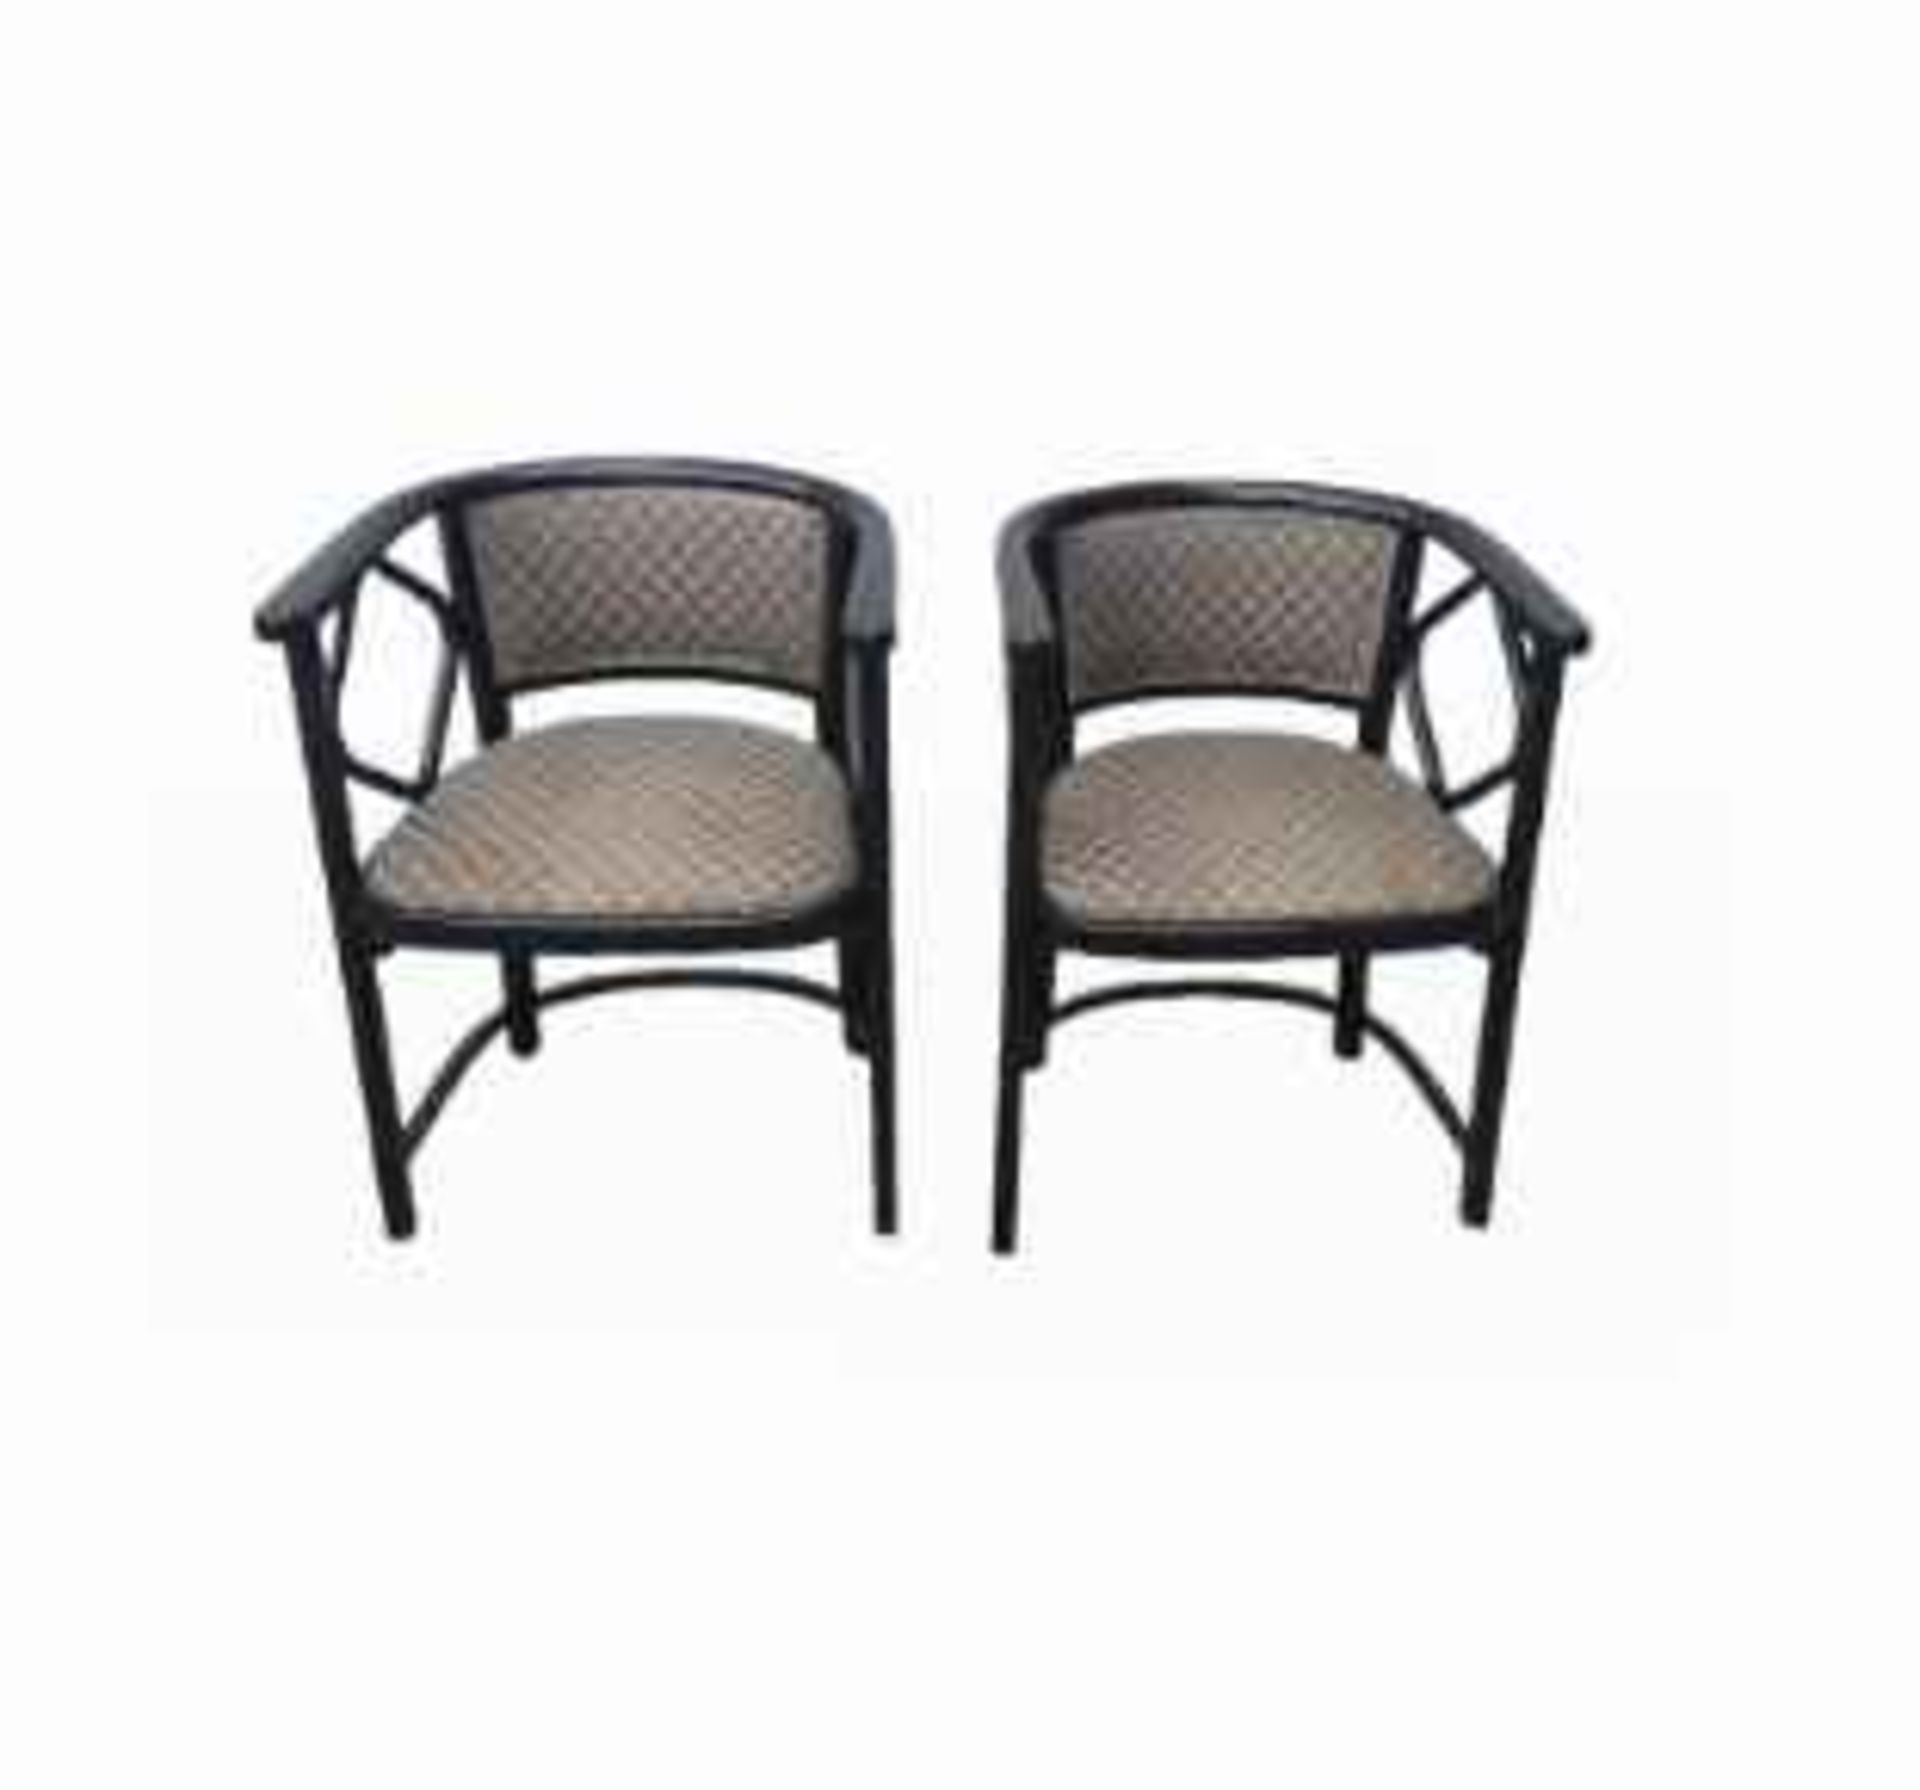 Thonet | Varient "Fledermaus" | 3 Piece Set: 2 Chairs & 1 Table - Image 3 of 8